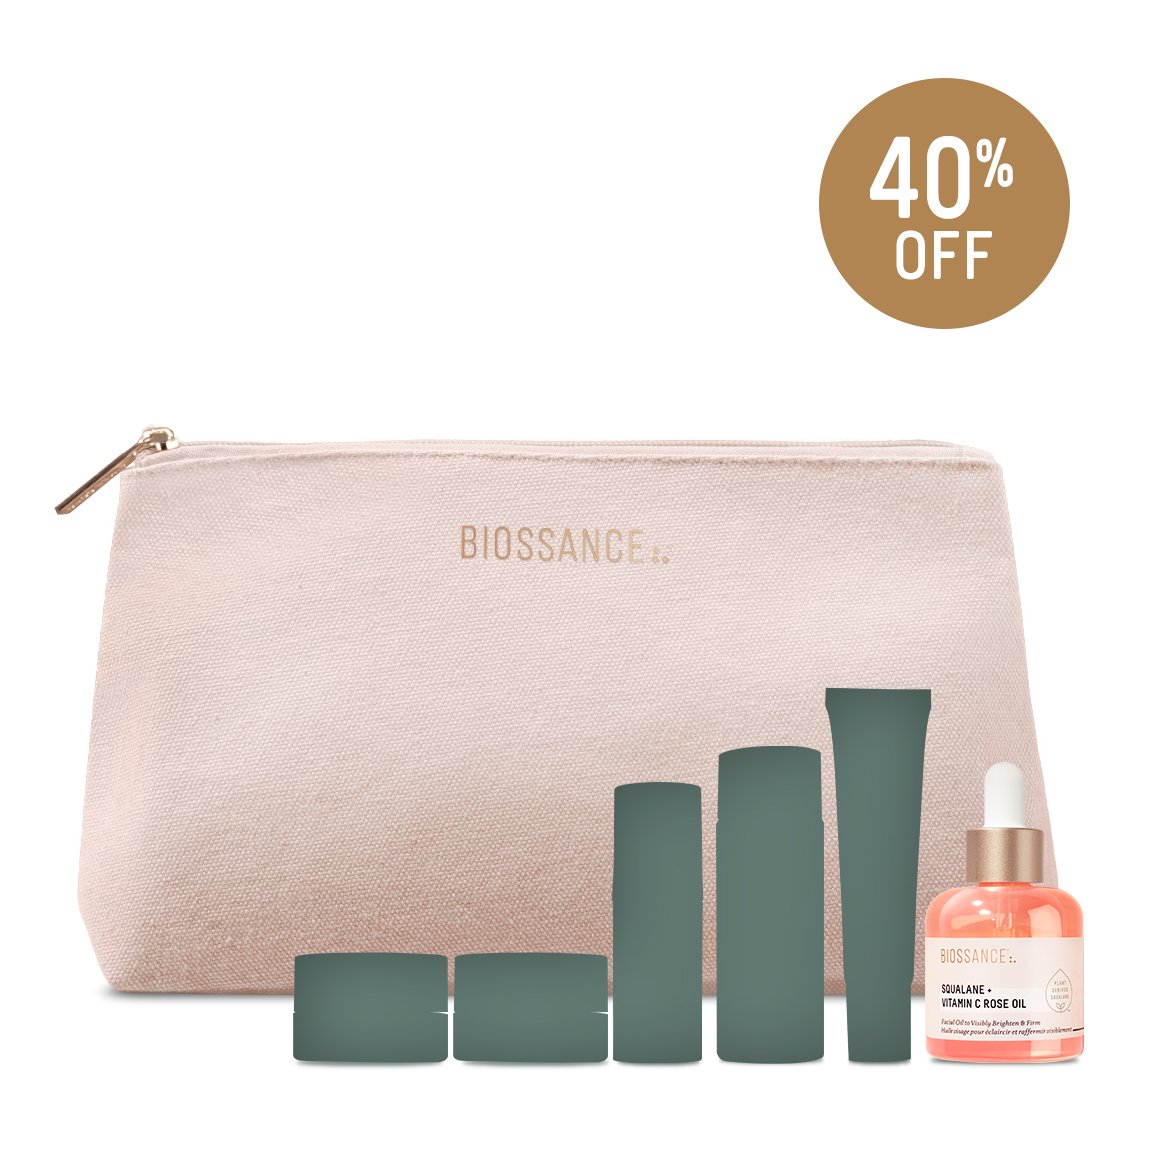 Biossance April 2021 Mystery Bag – Available Now